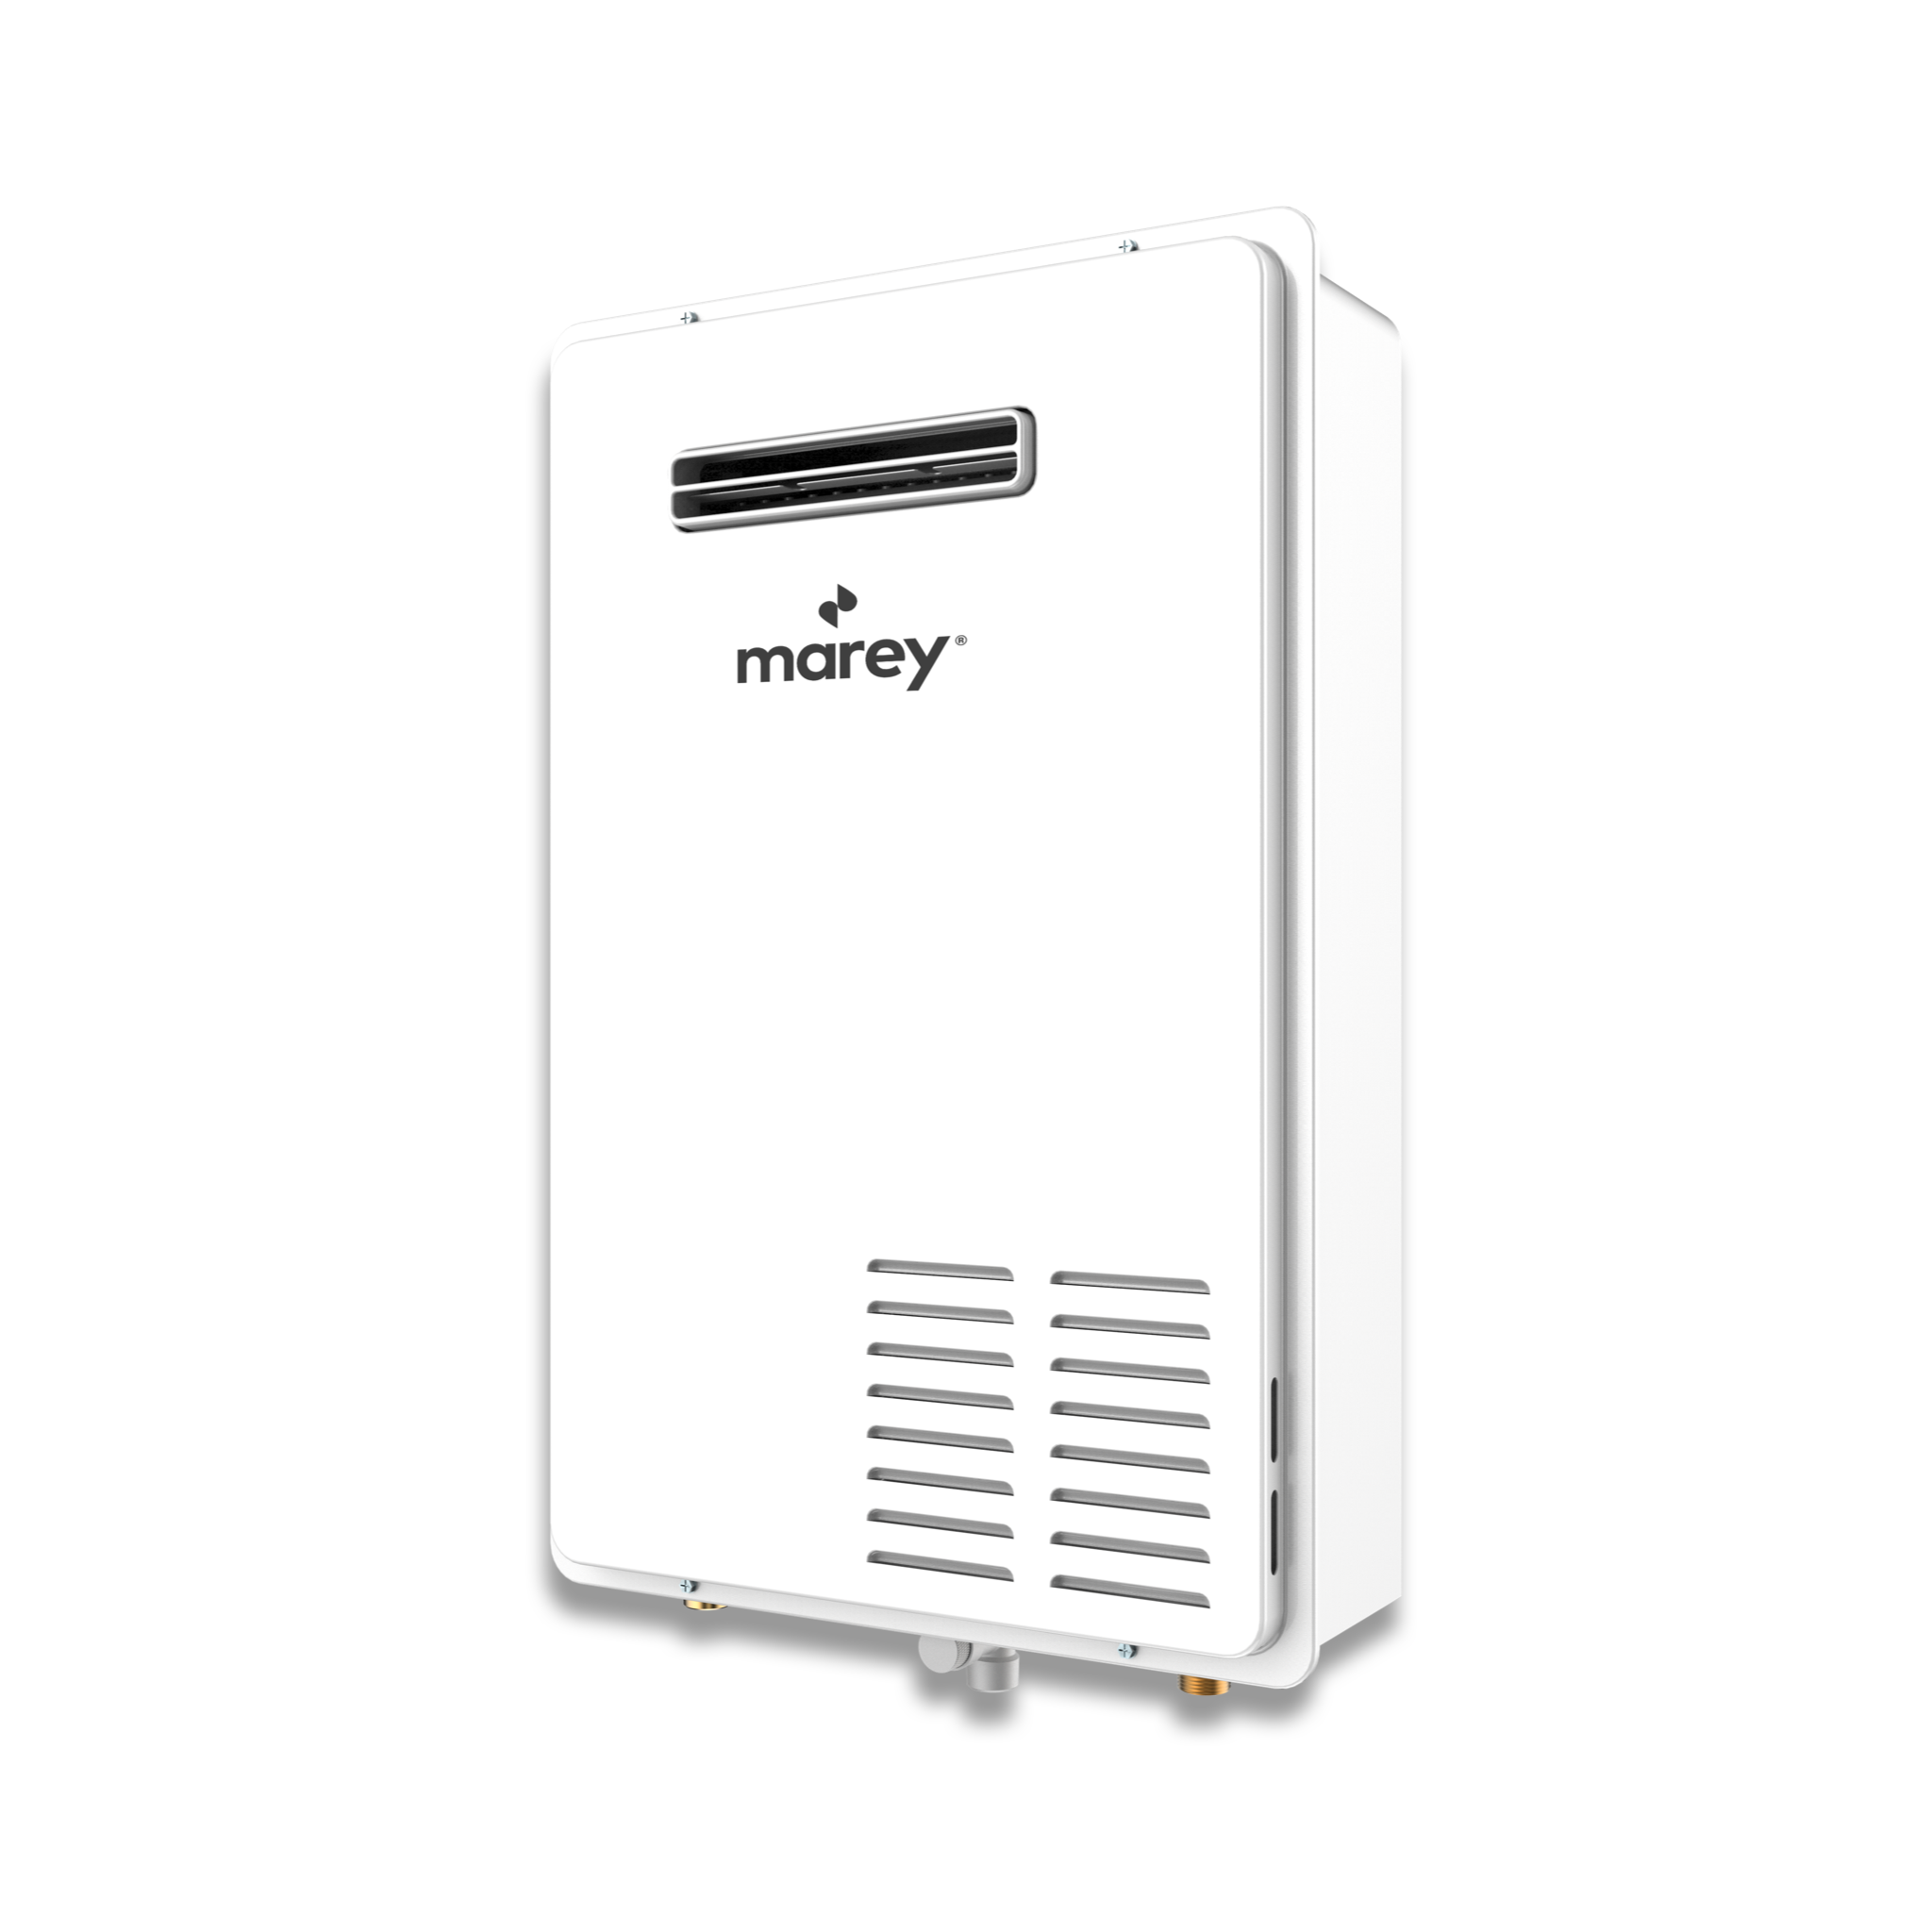 Marey, Marey Gas 26L 6.8 GPM Natural Gas Outdoor Tankless Water Heater New